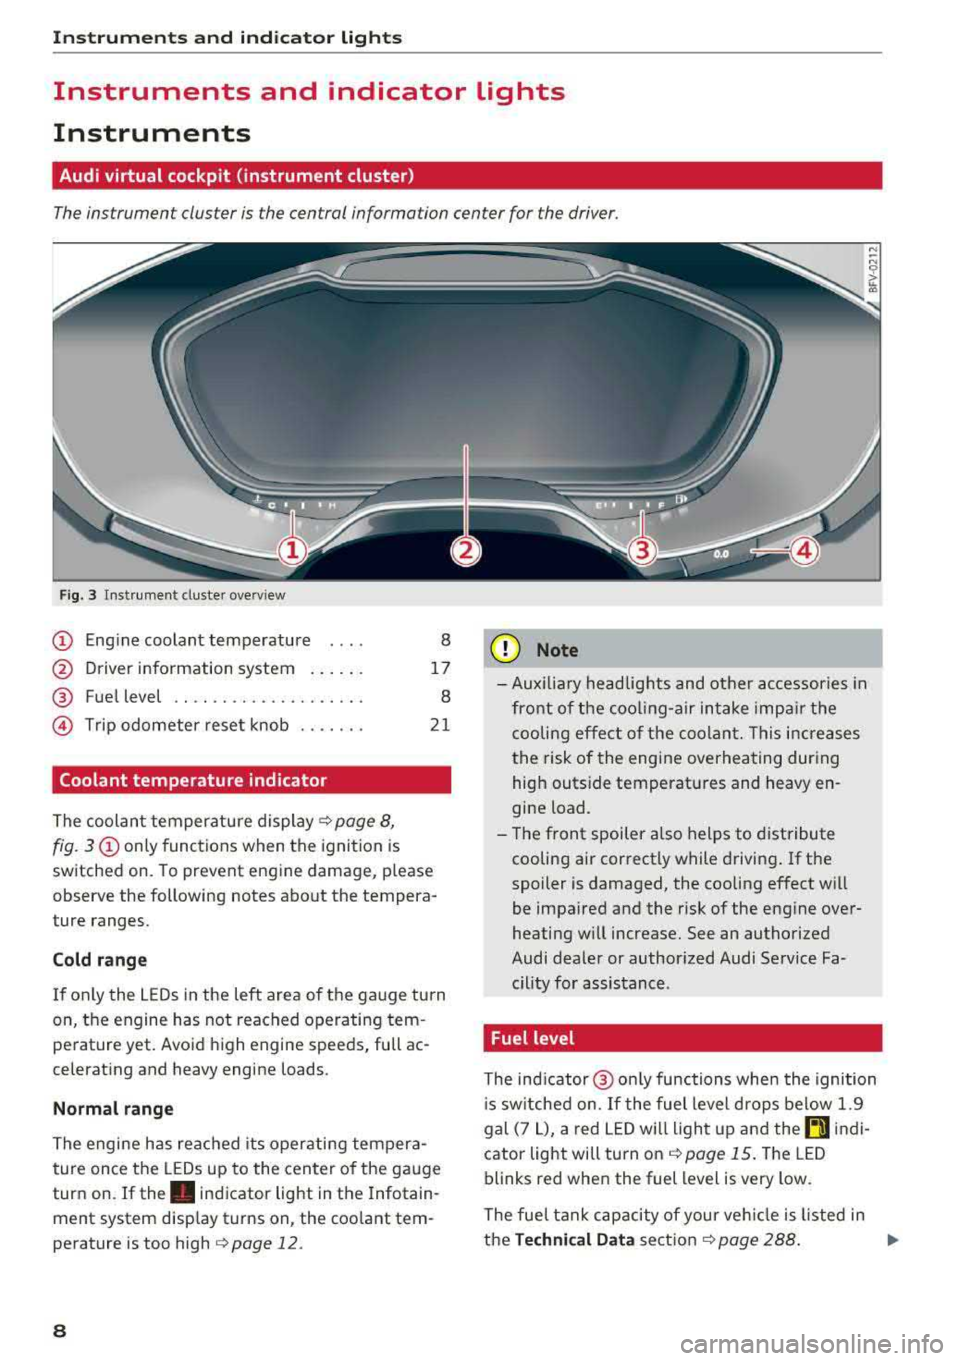 AUDI TT ROADSTER 2018  Owners Manual Instruments and indicator  lights 
Instruments  and  indicator  lights  
Instruments 
Audi virtual  cockpit  (instrument  cluster) 
The instrument  cluster  is  the central  information  center  for  